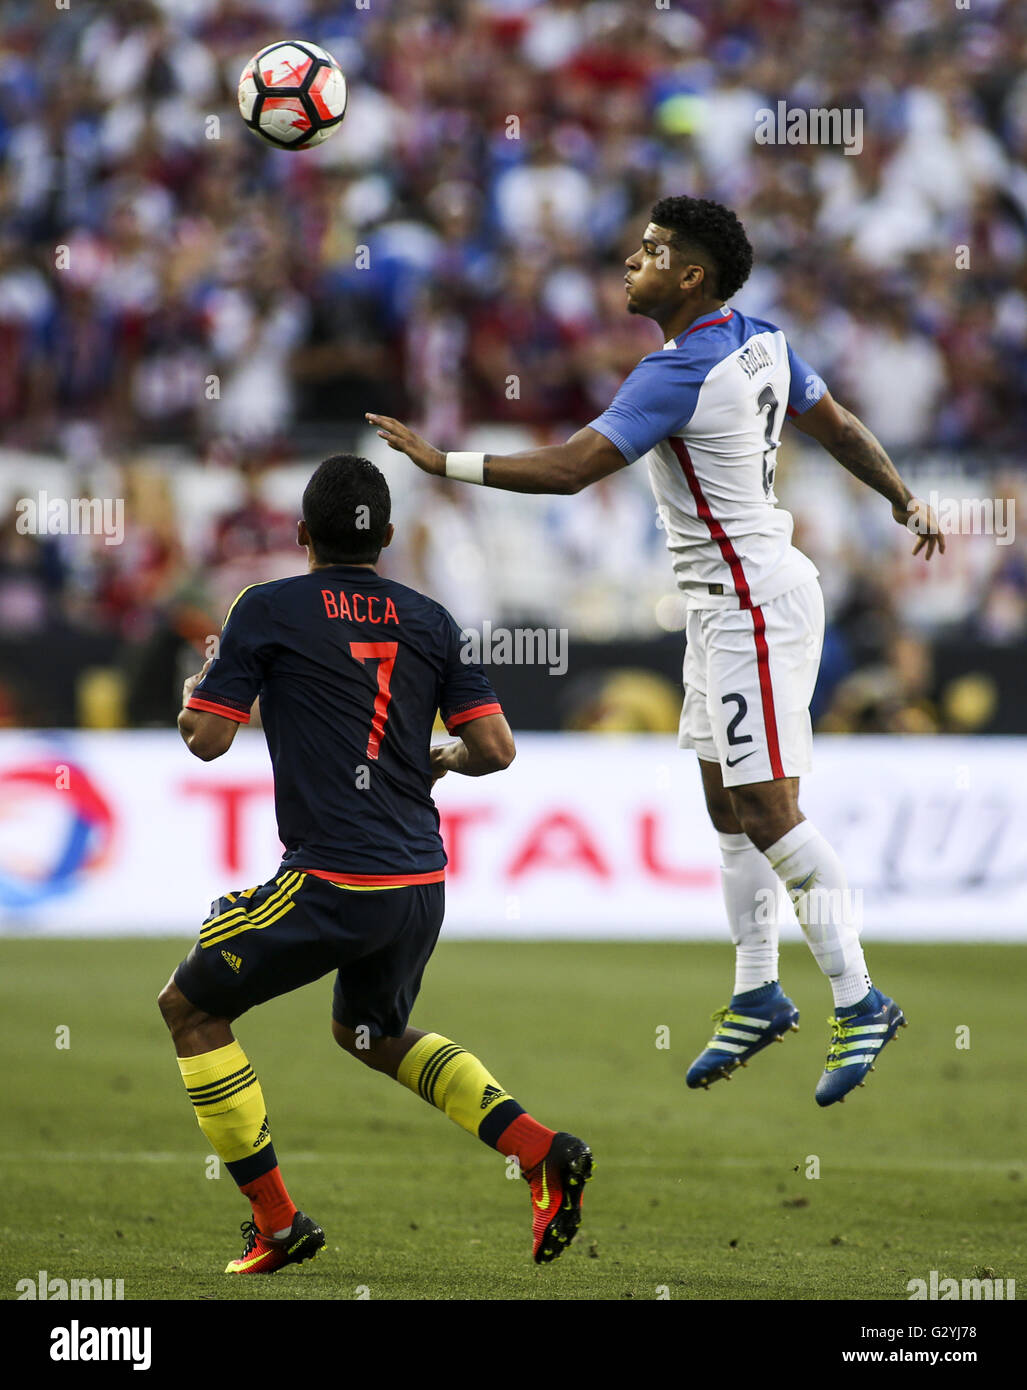 Los Angeles, California, USA. 3rd June, 2016. United States defender DeAndre Yedlin in the 2016 Copa America game between United States and Colombia at Levi's Stadium on June 3, 2016 in Santa Clara, California. © Ringo Chiu/ZUMA Wire/Alamy Live News Stock Photo